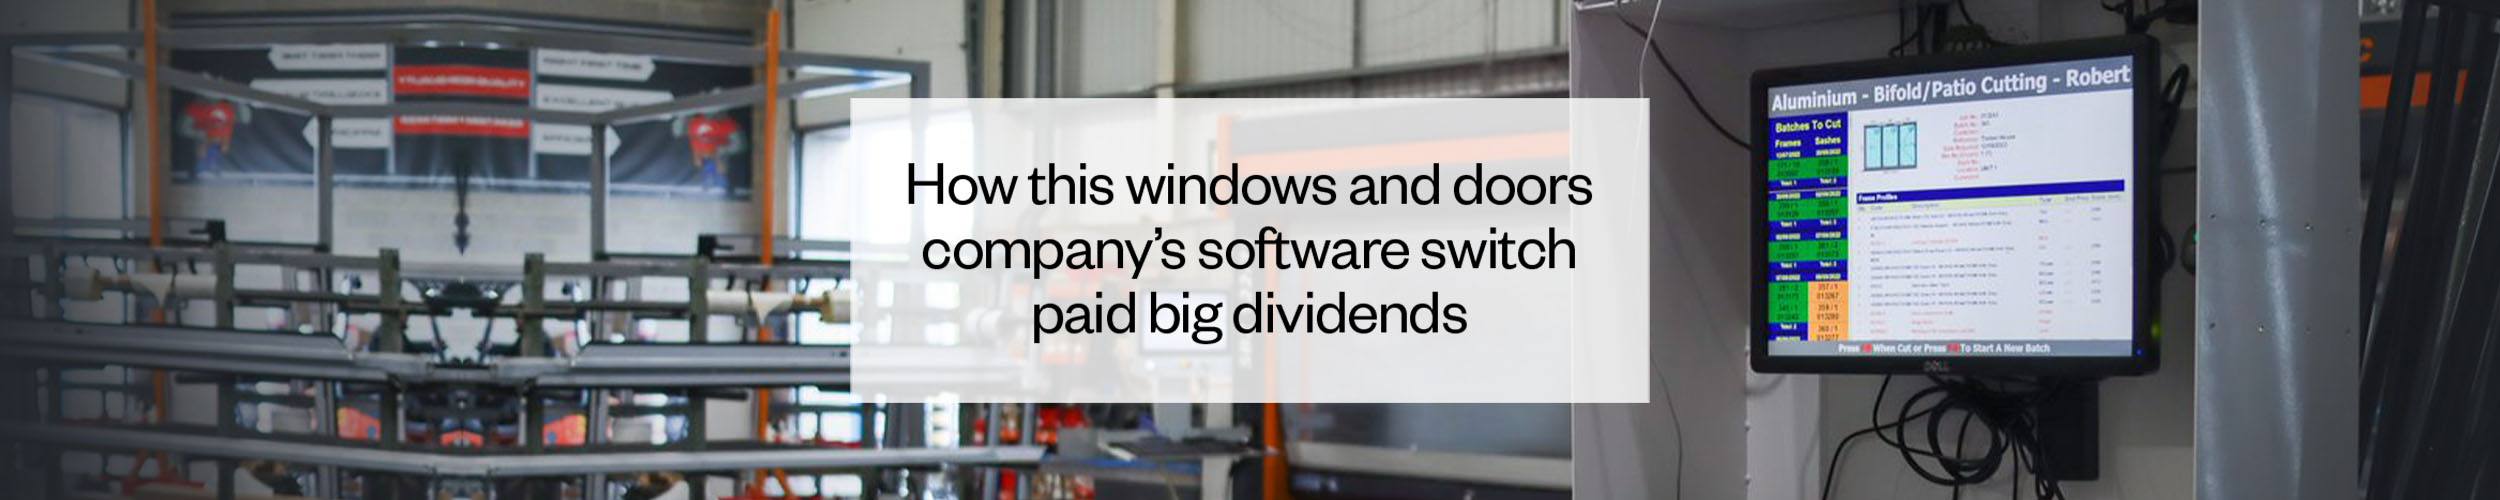 Windows and doors company’s software